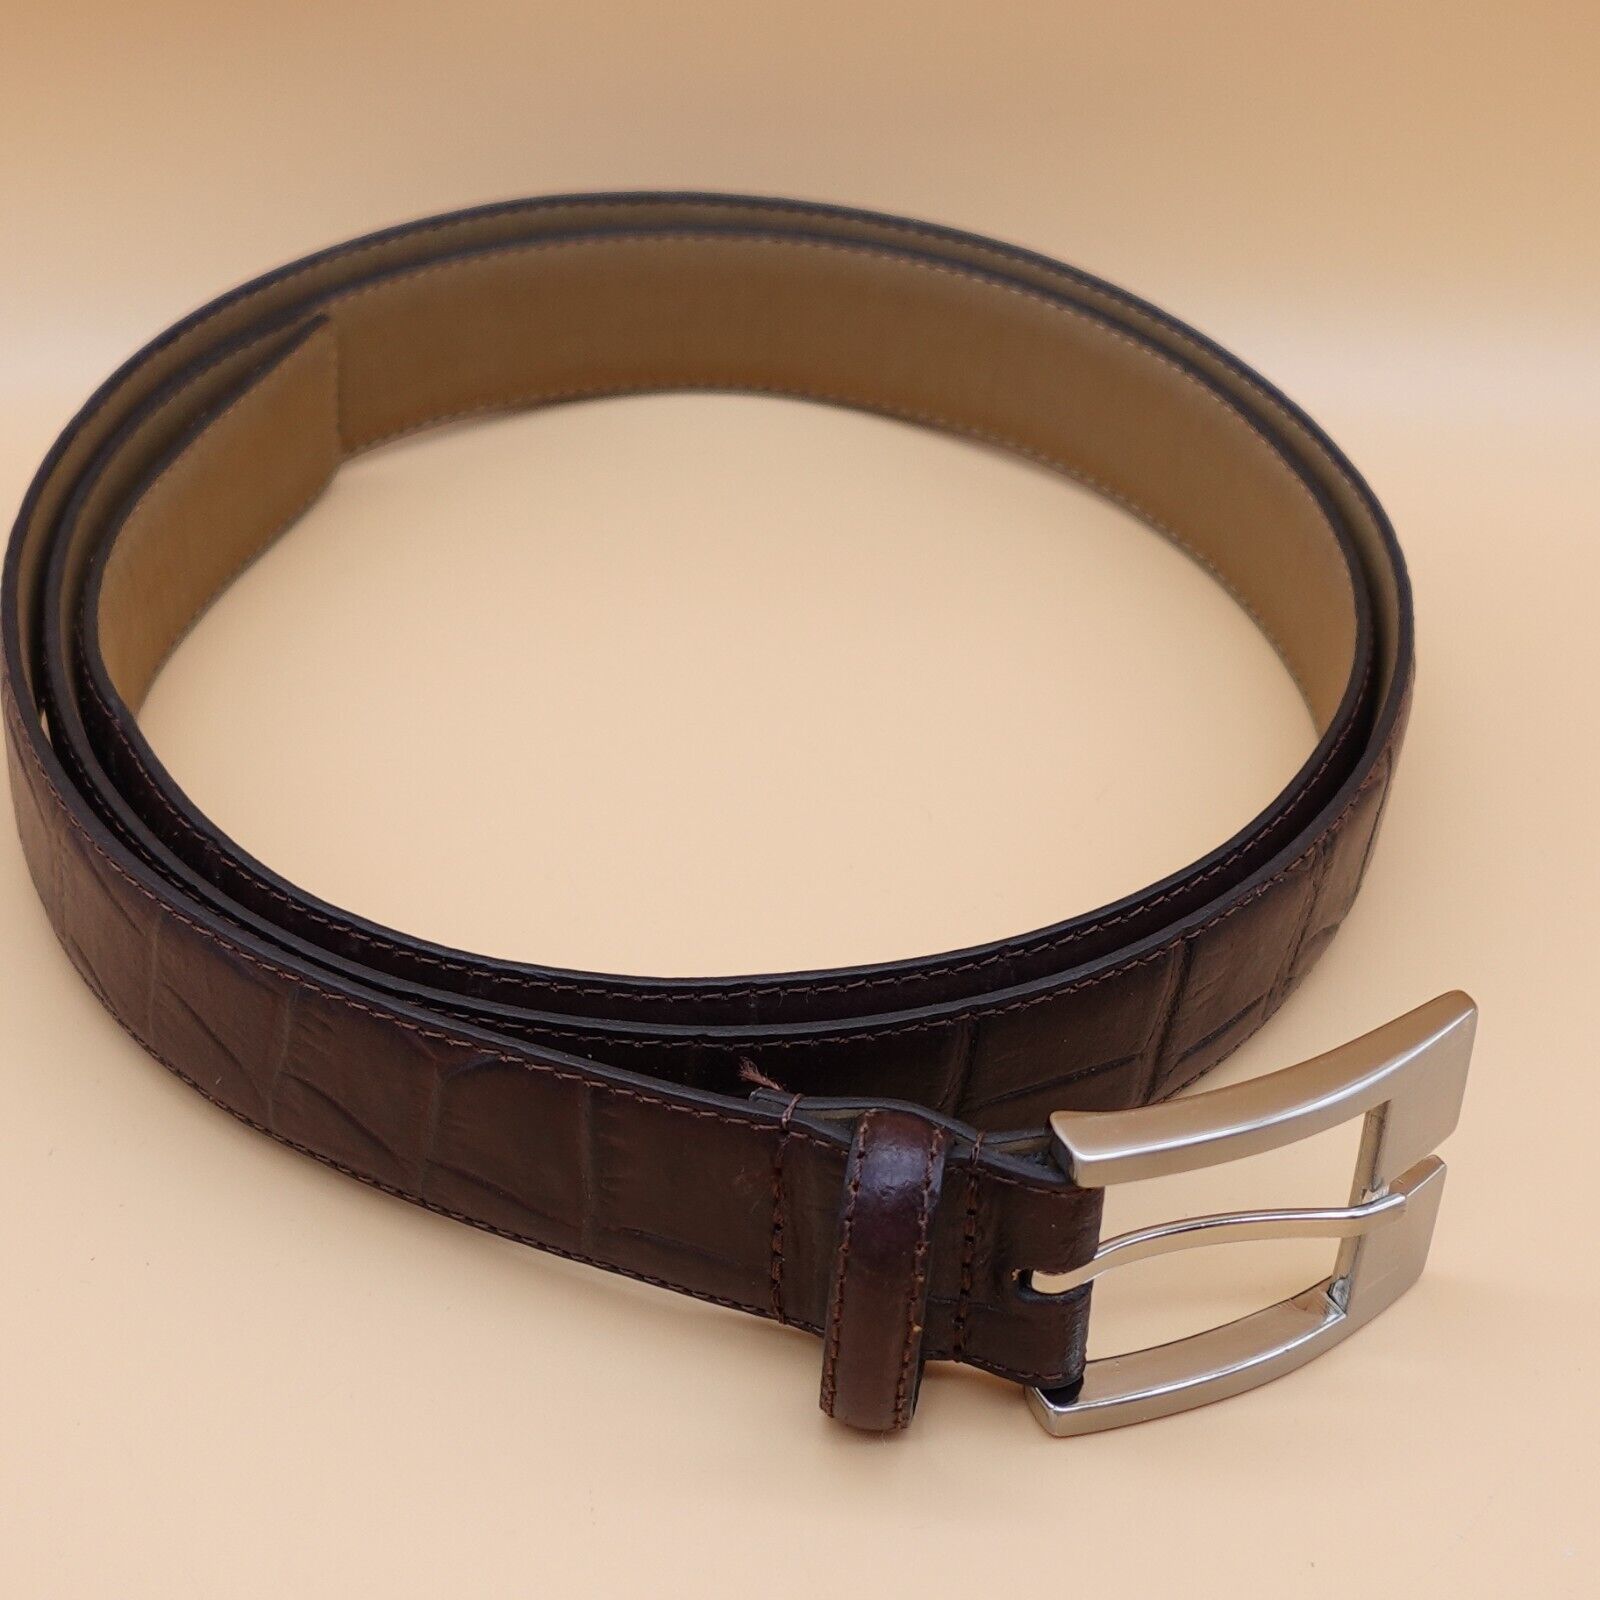 Primary image for Snake Eyes Belt Brown Textured Leather Golf Silver Color Buckle Men Size 50 125